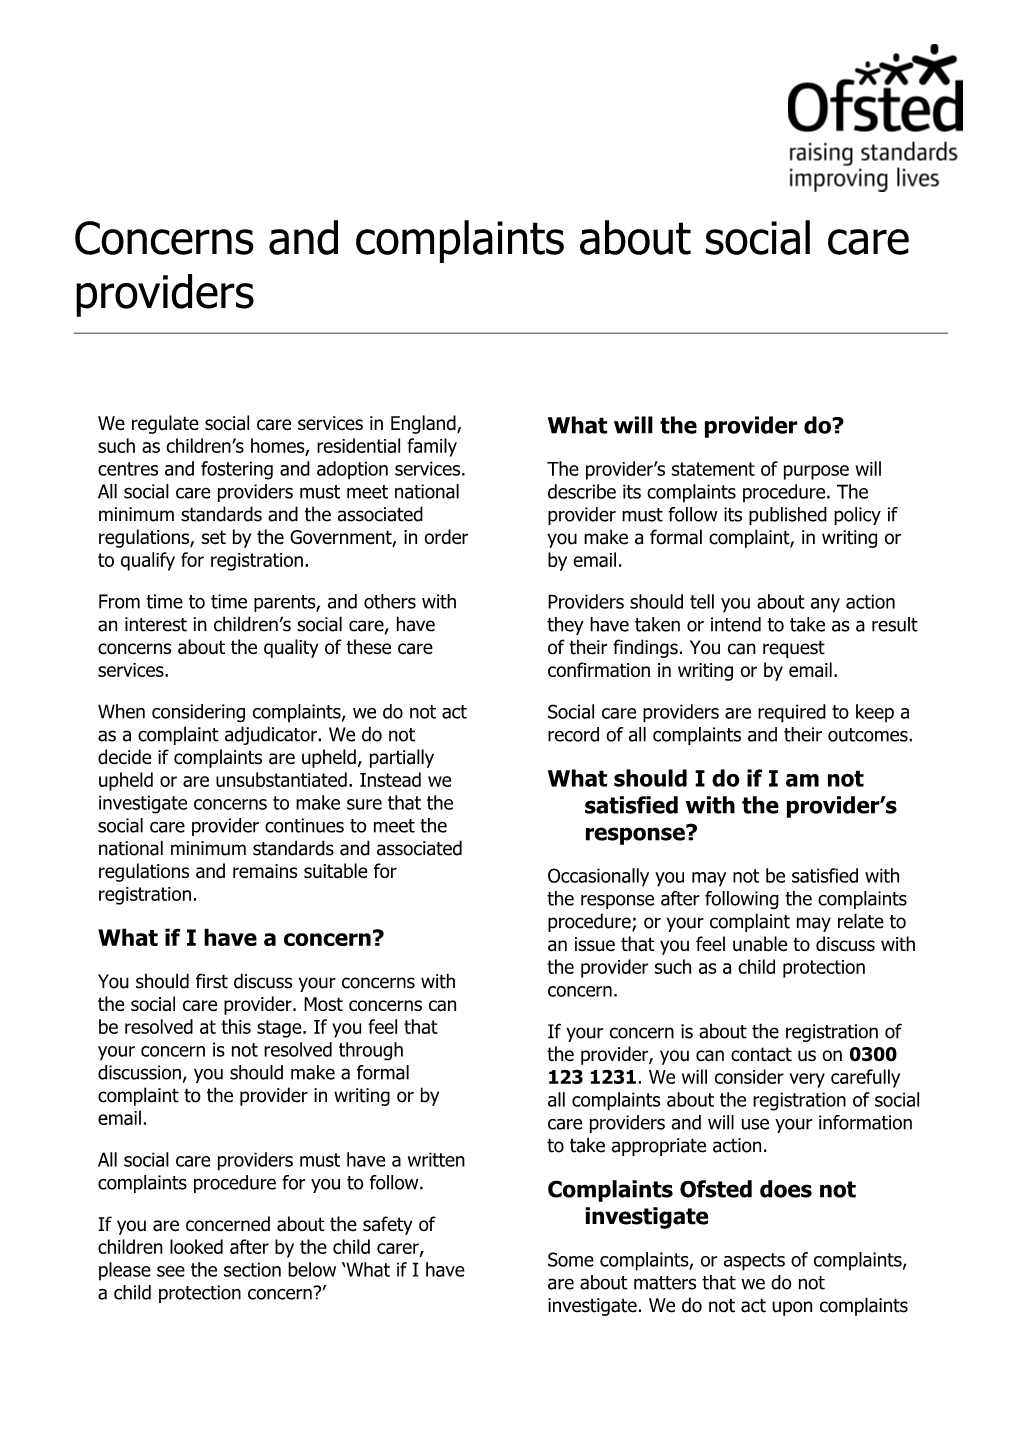 Concerns and Complaints About Social Care Providers